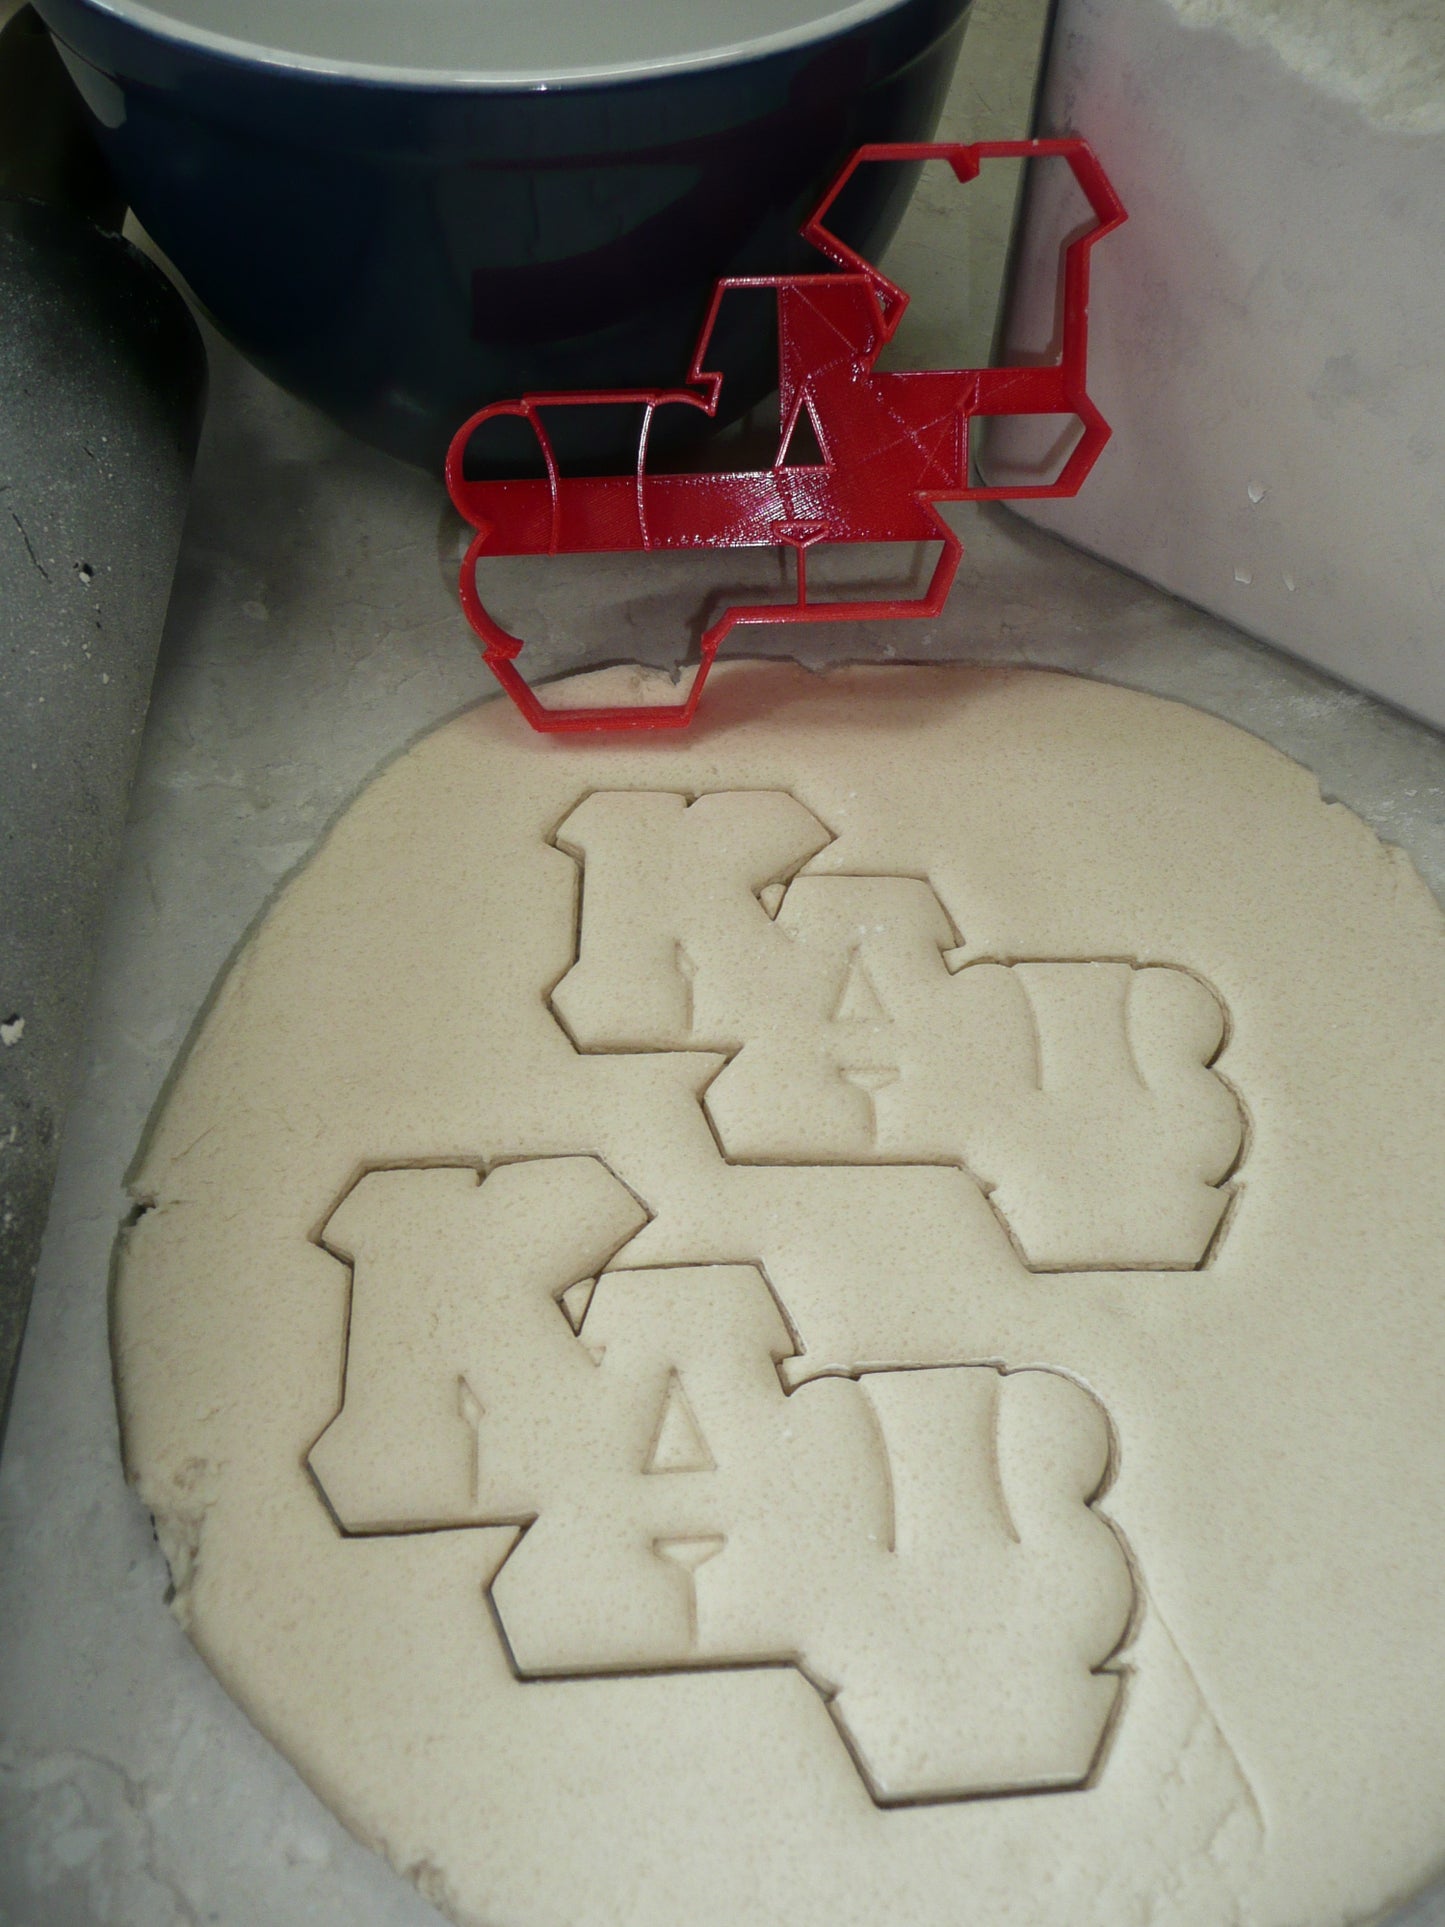 Kappa Alpha Psi Letters Fraternity Cookie Cutter Made In USA PR3507